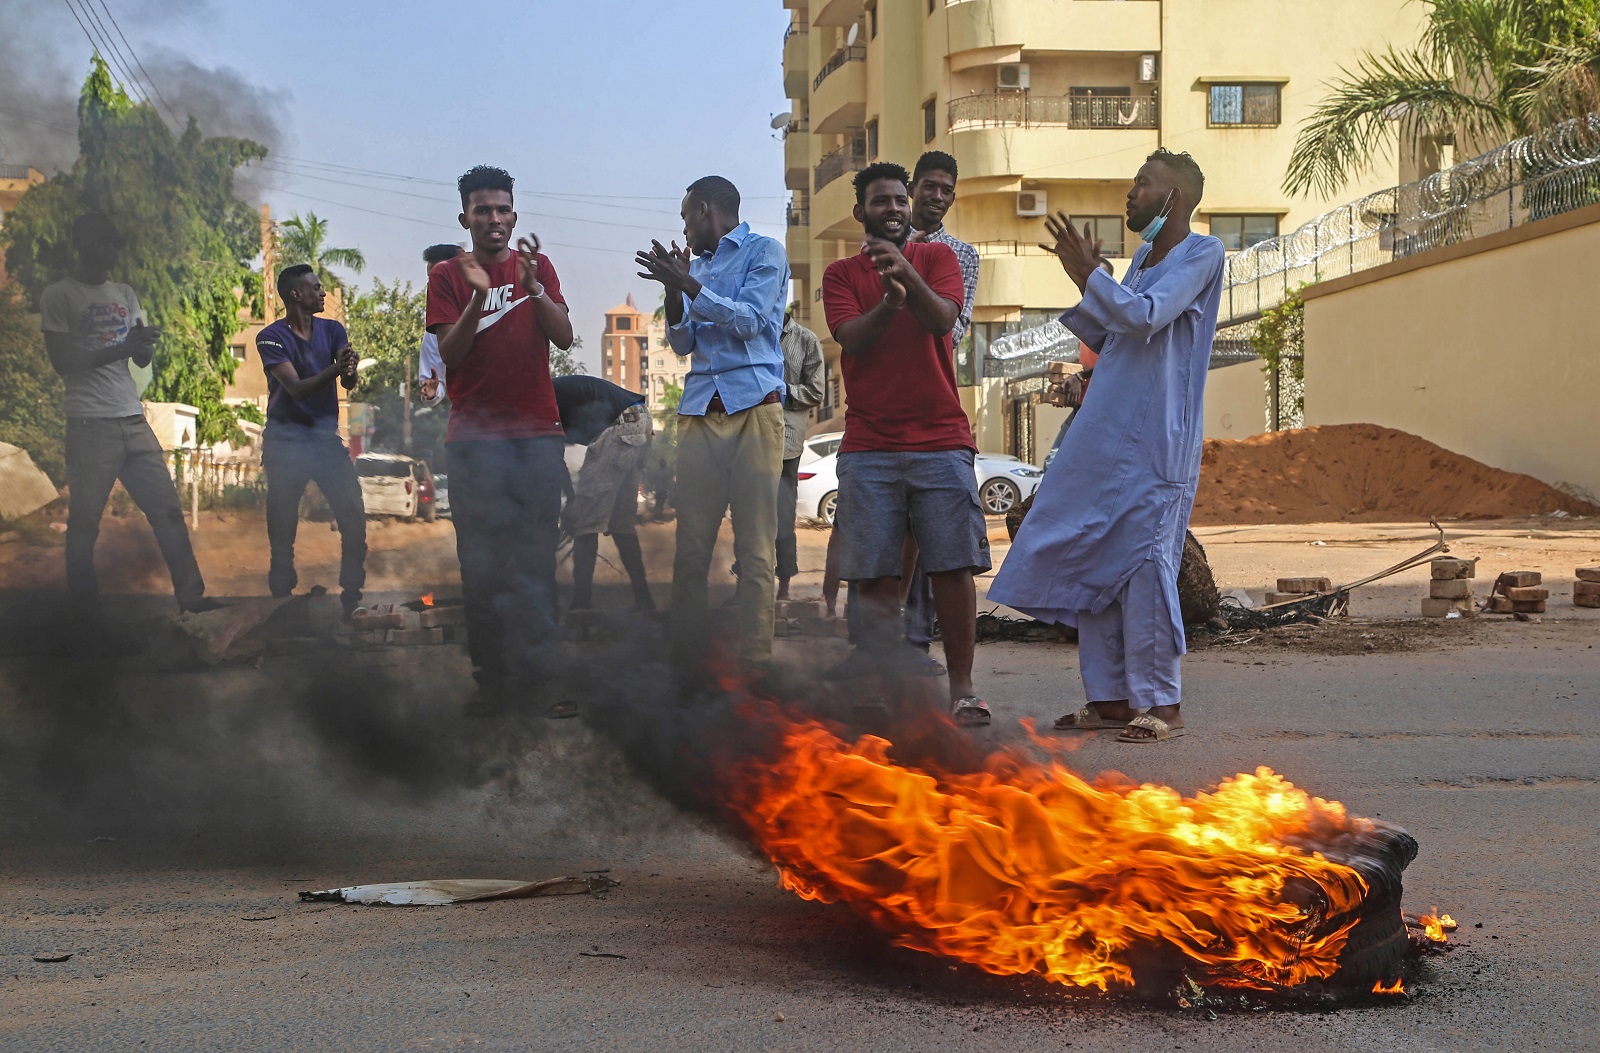 epa09545014 Sudanese protester chant near burning tires during a demonstration in the capital Khartoum, Sudan 25 October 2021. Sudan's military launched a coup attempt, and arrested the Prime Minister Abdalla Hamdok and other senior ministers and civilian members of the Transitional Sovereignty Council during early morning raids, as thousands of people gather for protest the attempt in the capital, Khartoum.  EPA/MOHAMMED ABU OBAID